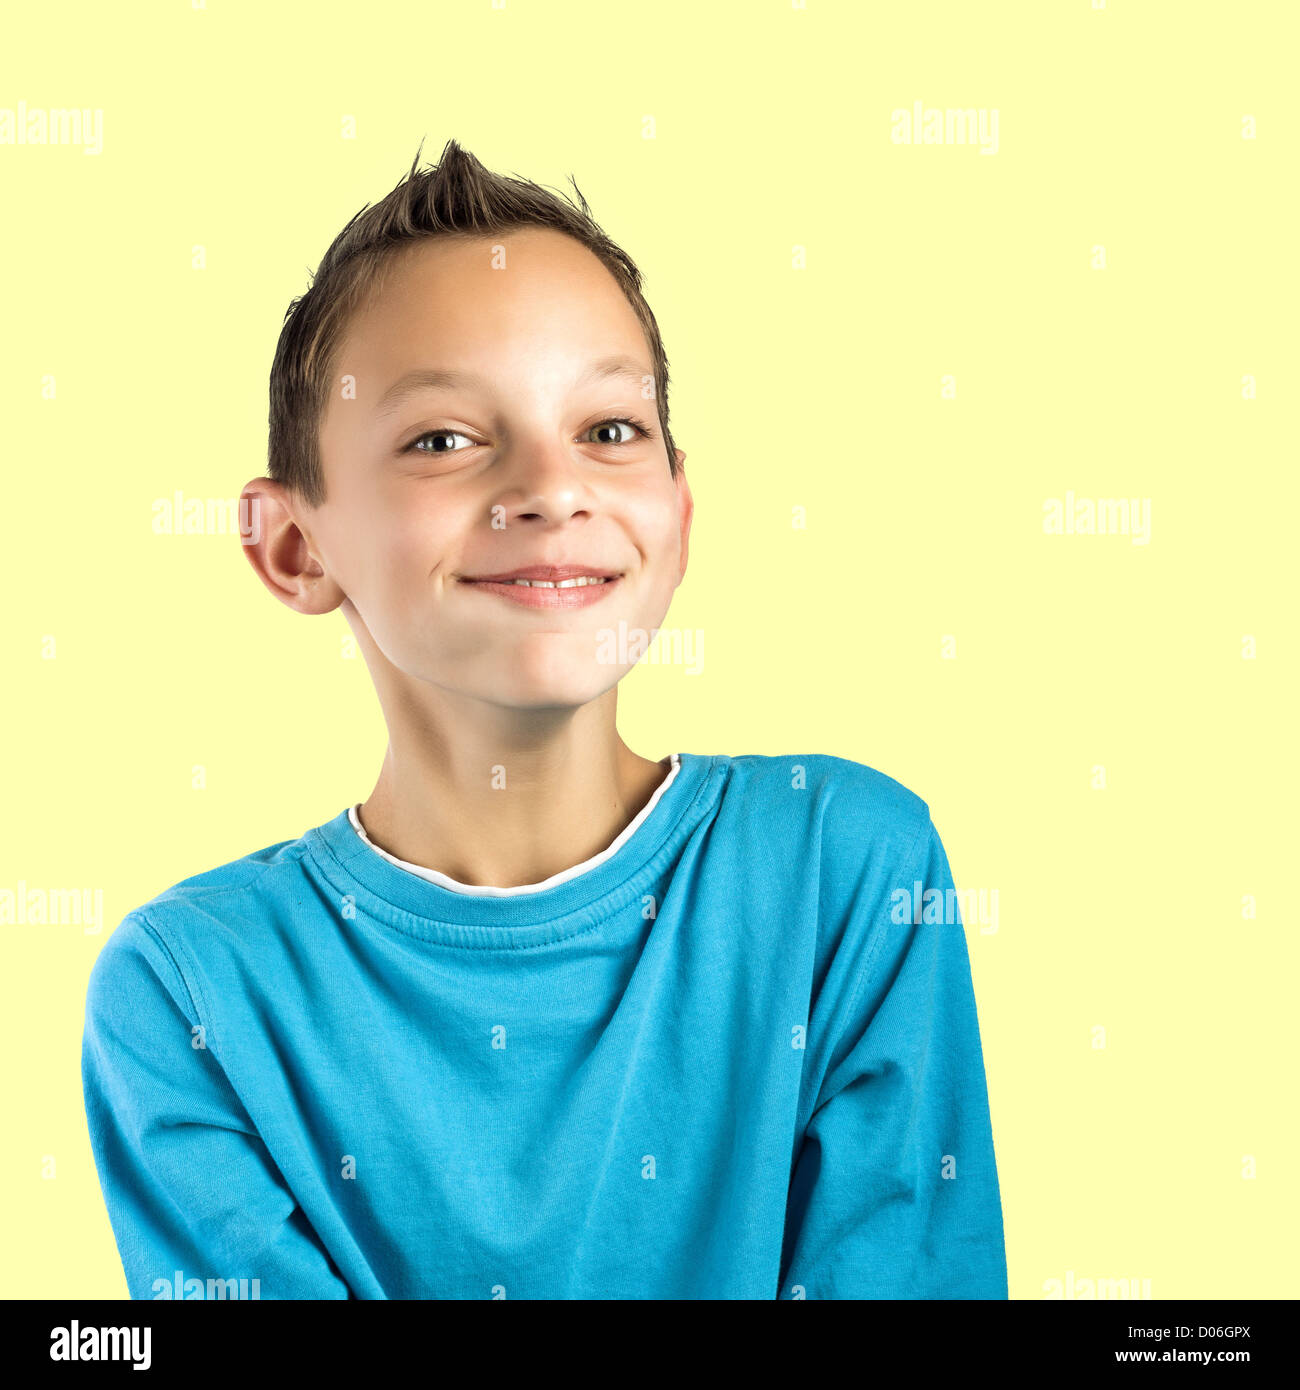 young boy making goofy face Stock Photo